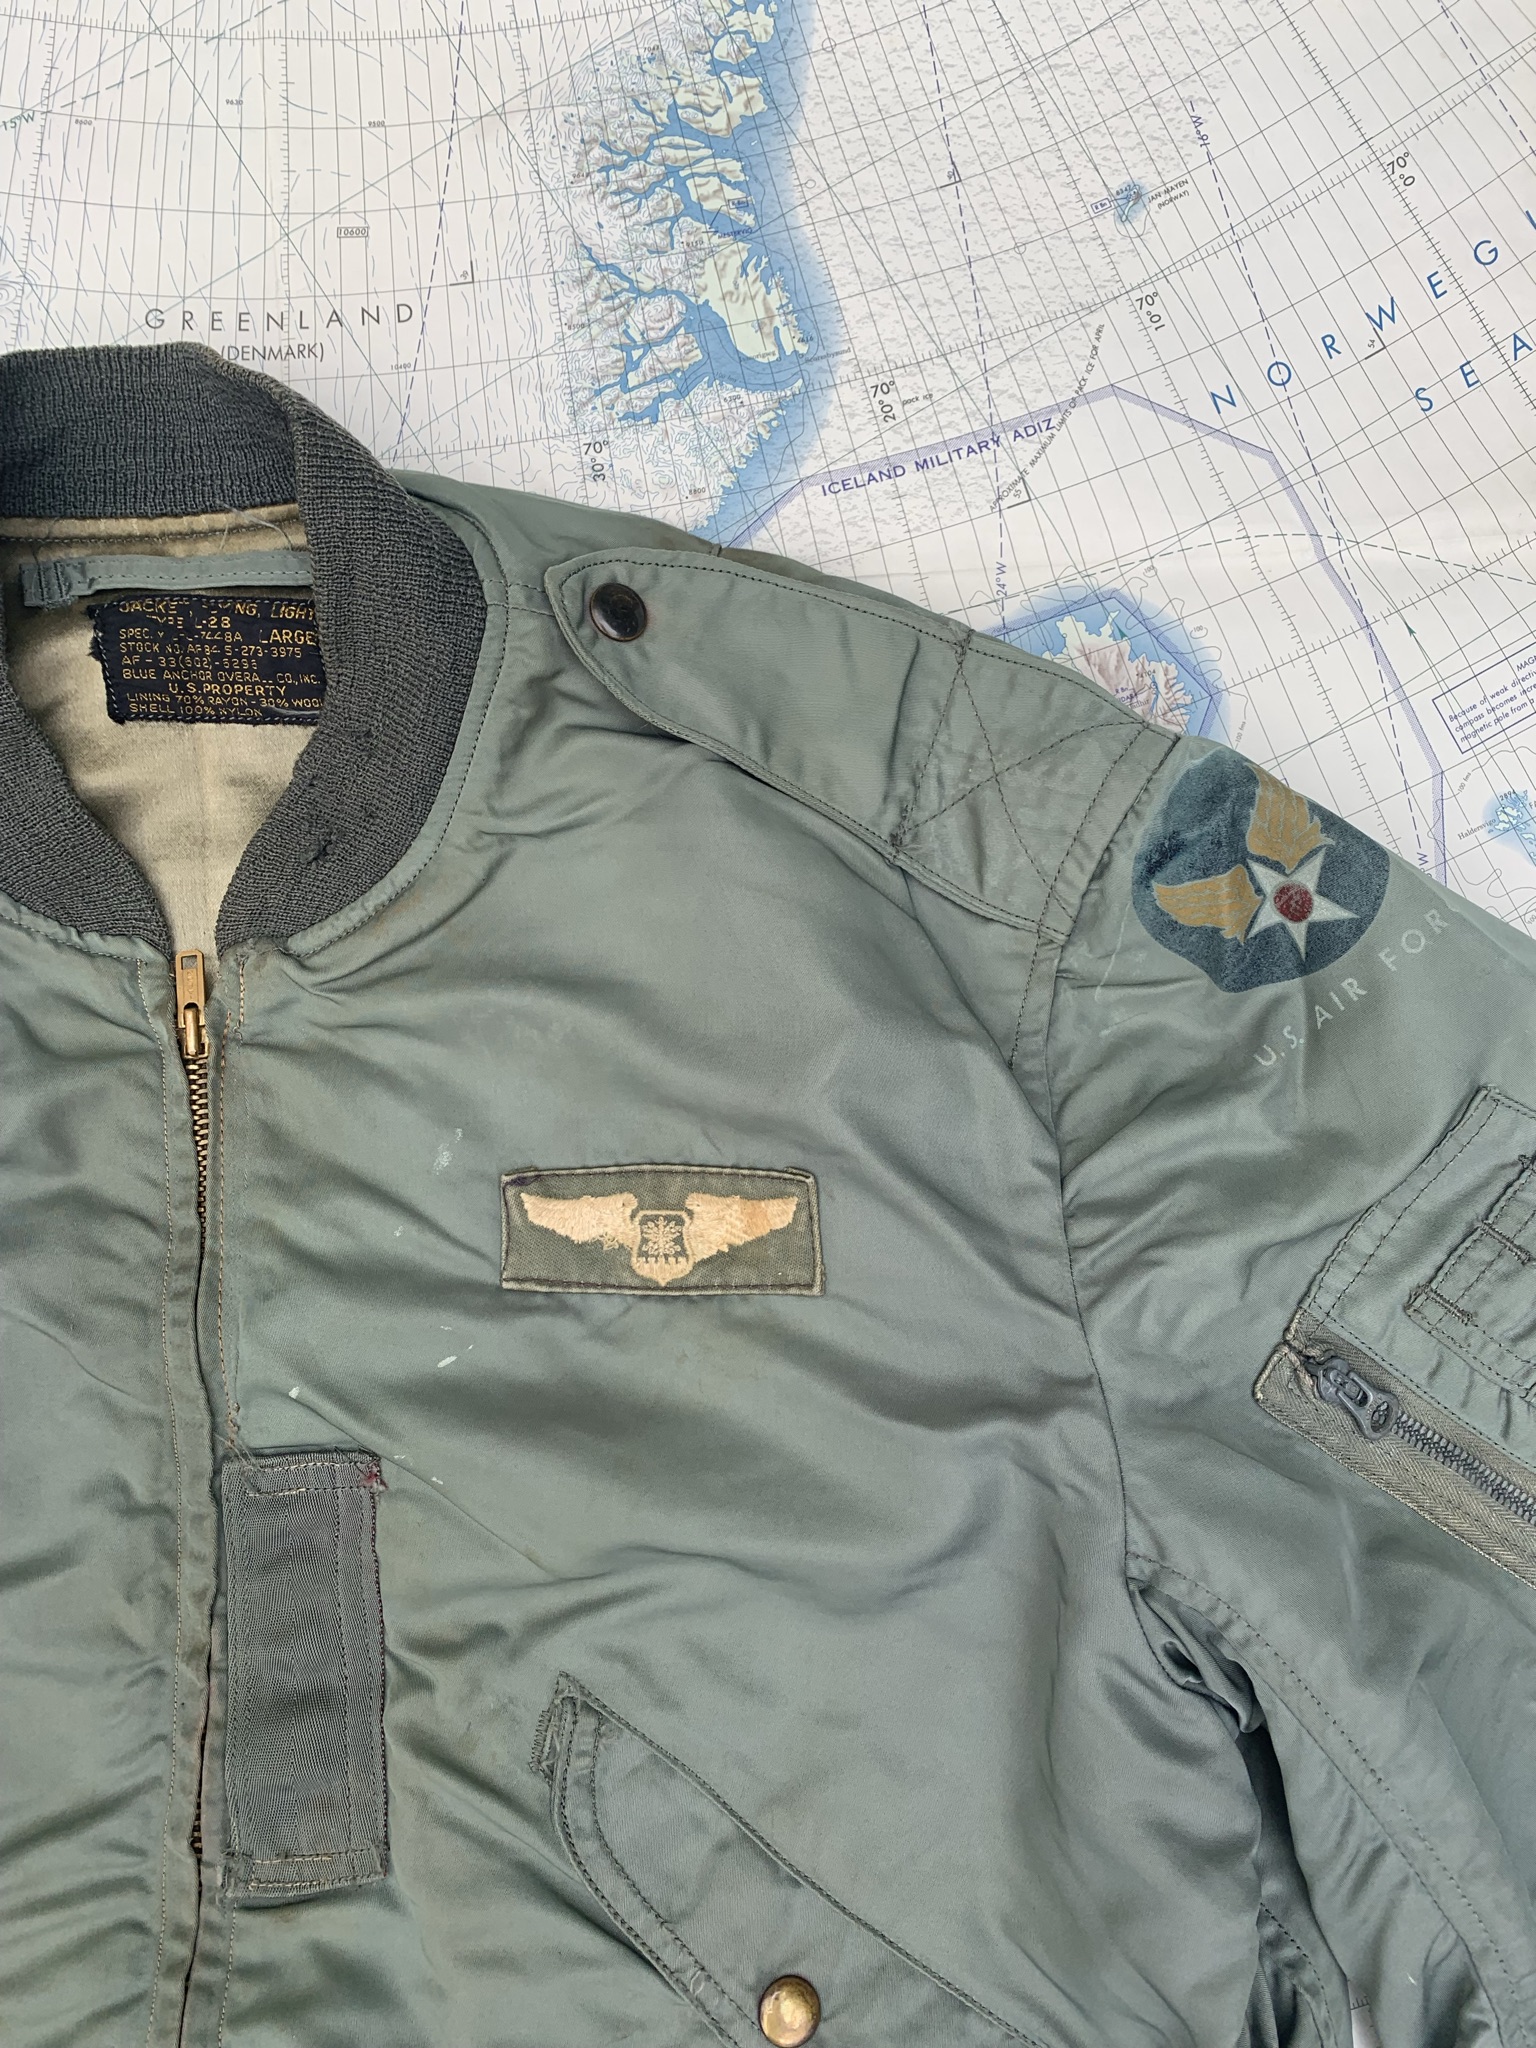 For the nylon jacket fans: L-2B collection | Vintage Leather